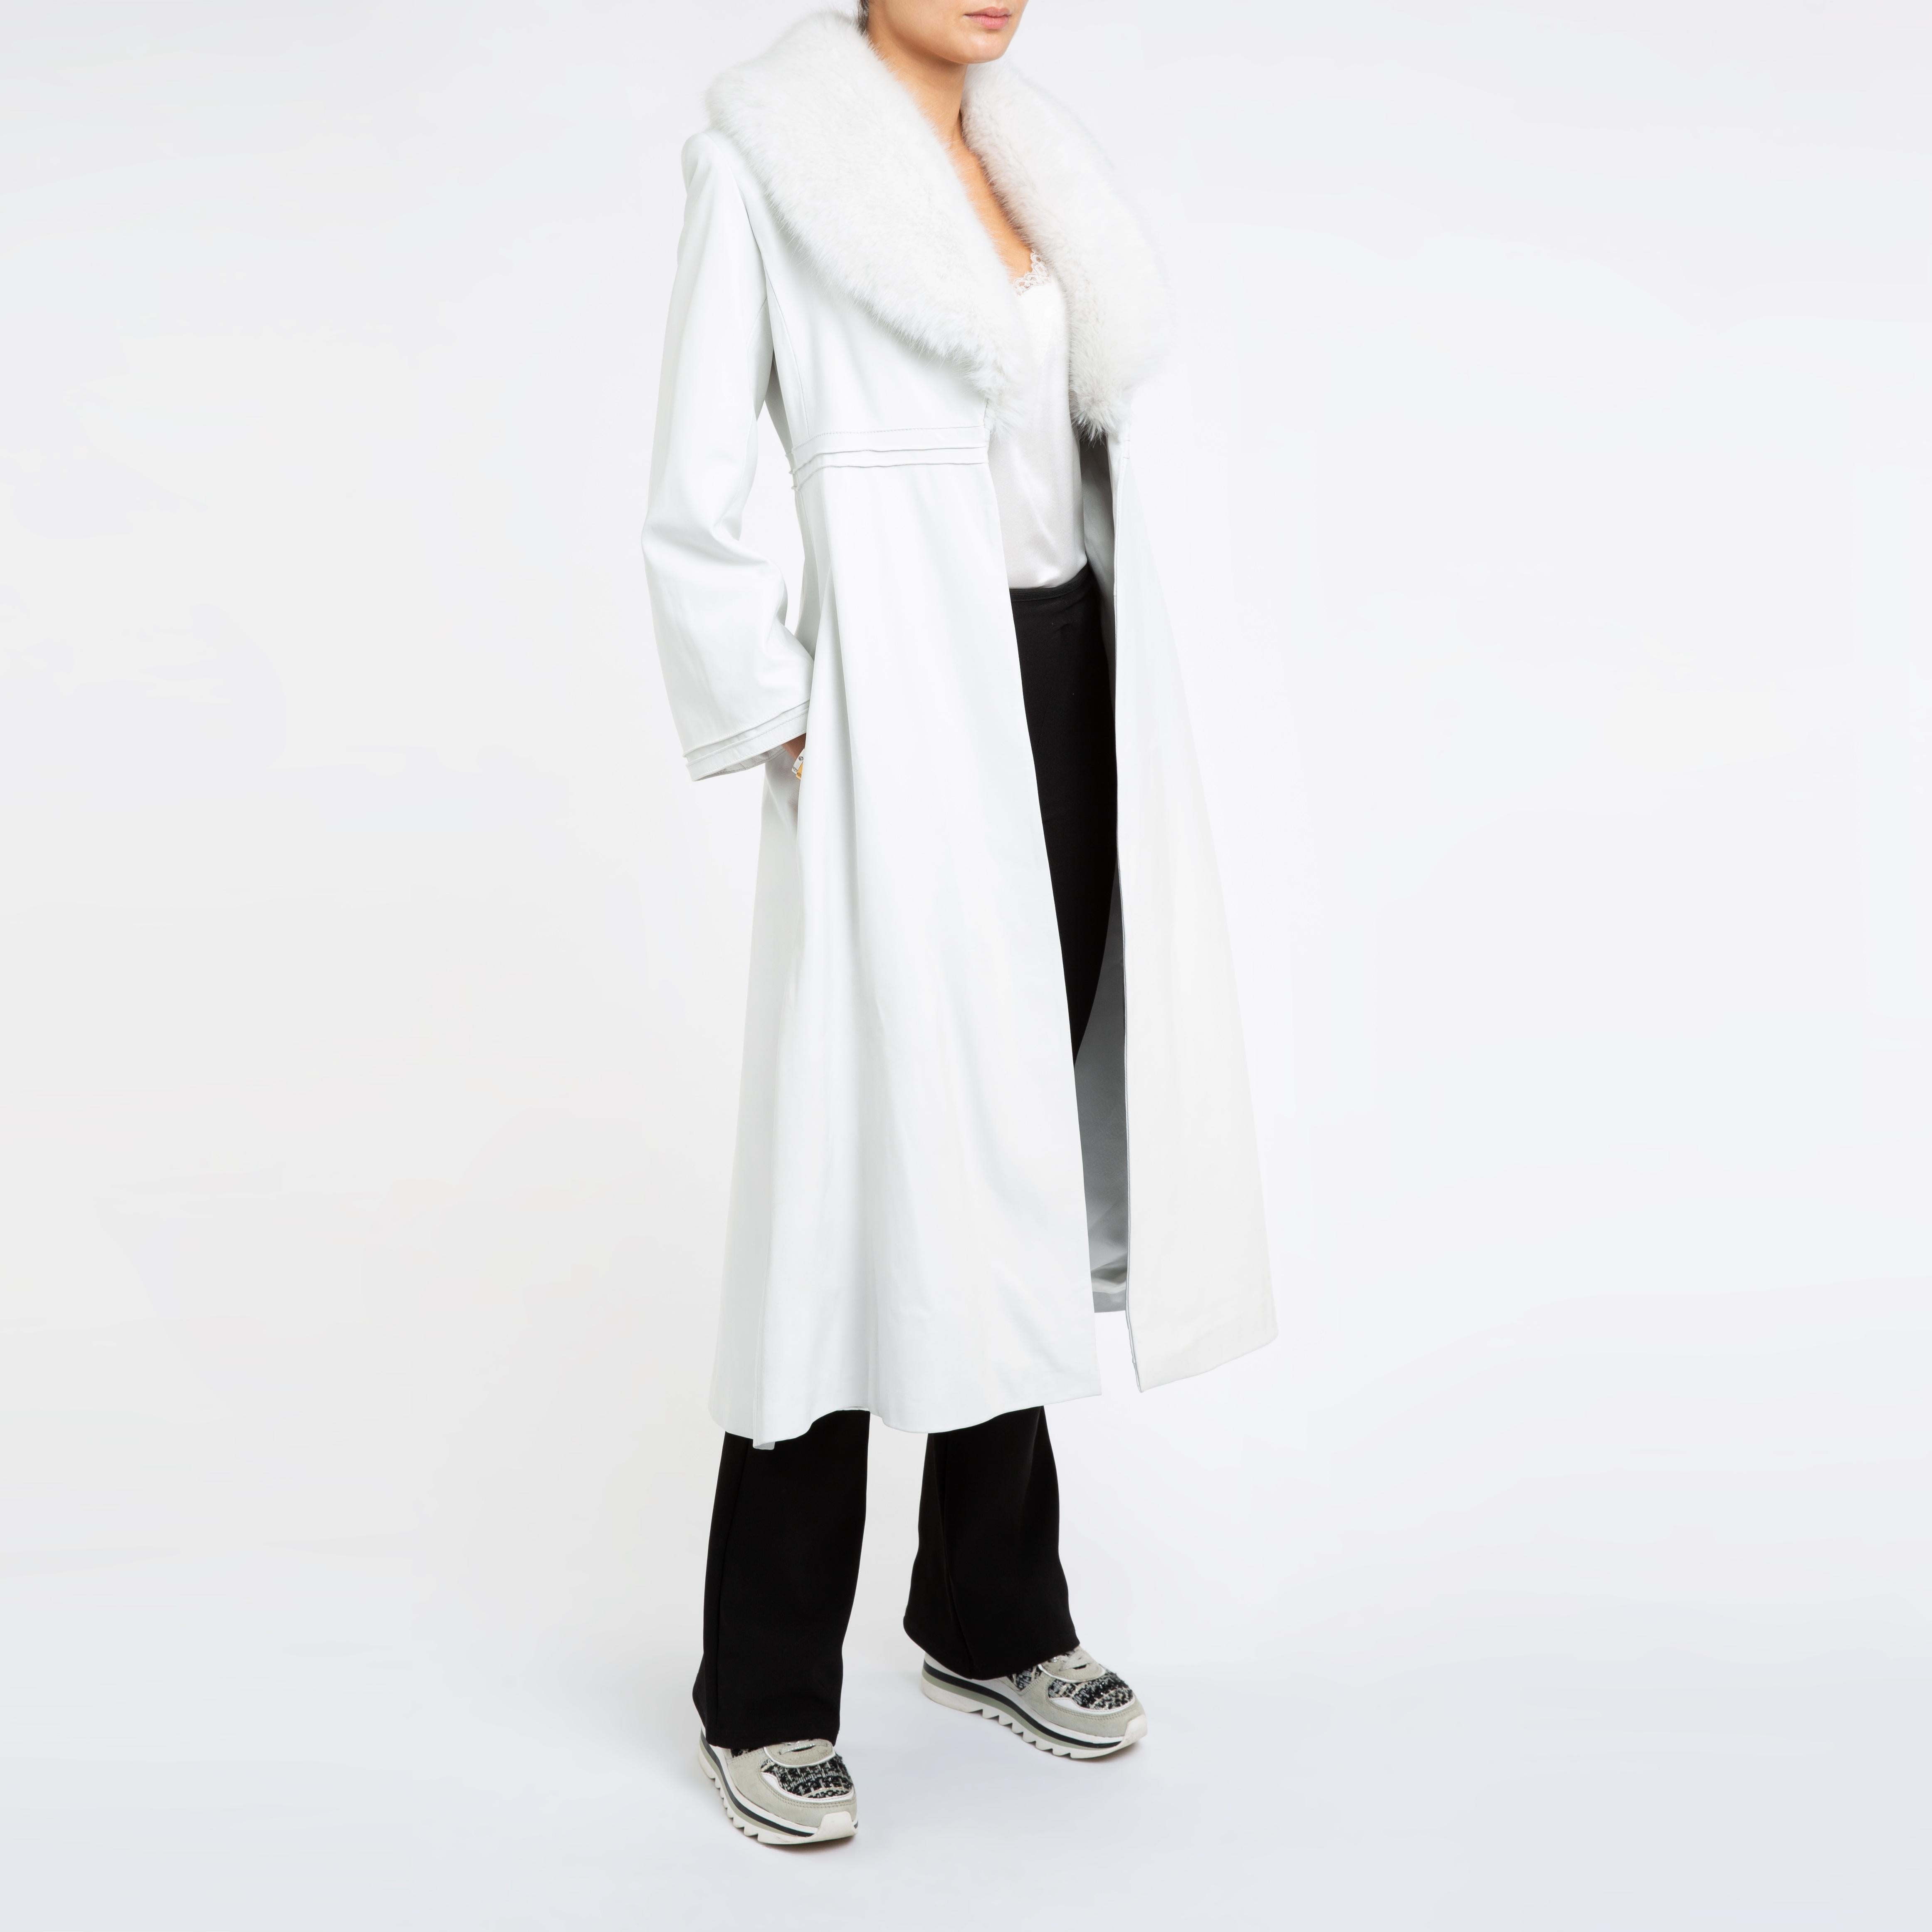 Verheyen London Edward Leather Coat in White with Faux Fur - Size uk 12

The Edward Leather Coat created by Verheyen London is a romantic design inspired by the 1970s and Edwardian Era of Fashion.  A timeless design to be be worn for a lifetime and